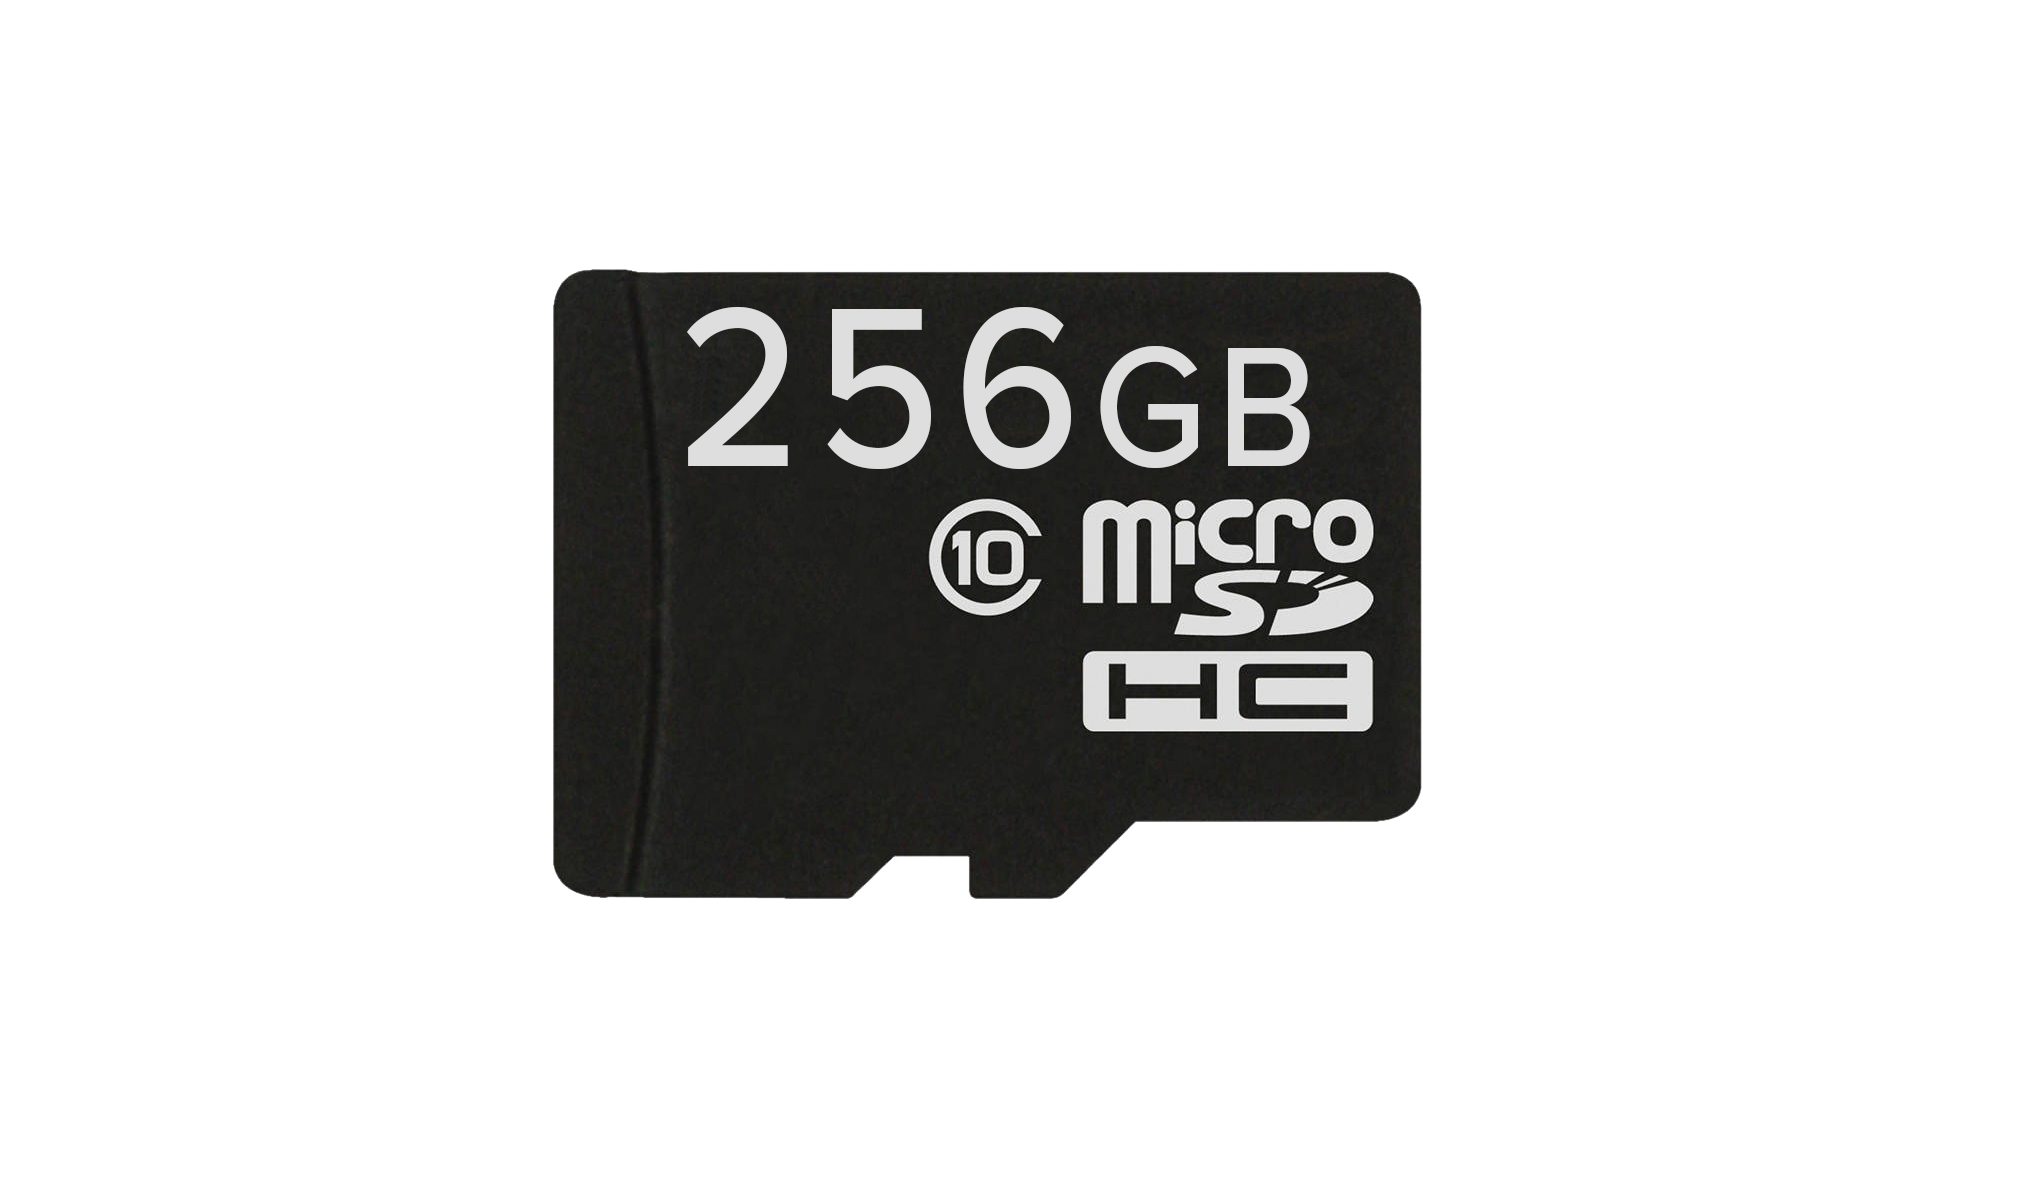 256GB MicroSD/TF Card for Smartphones,Tablets and Laptops